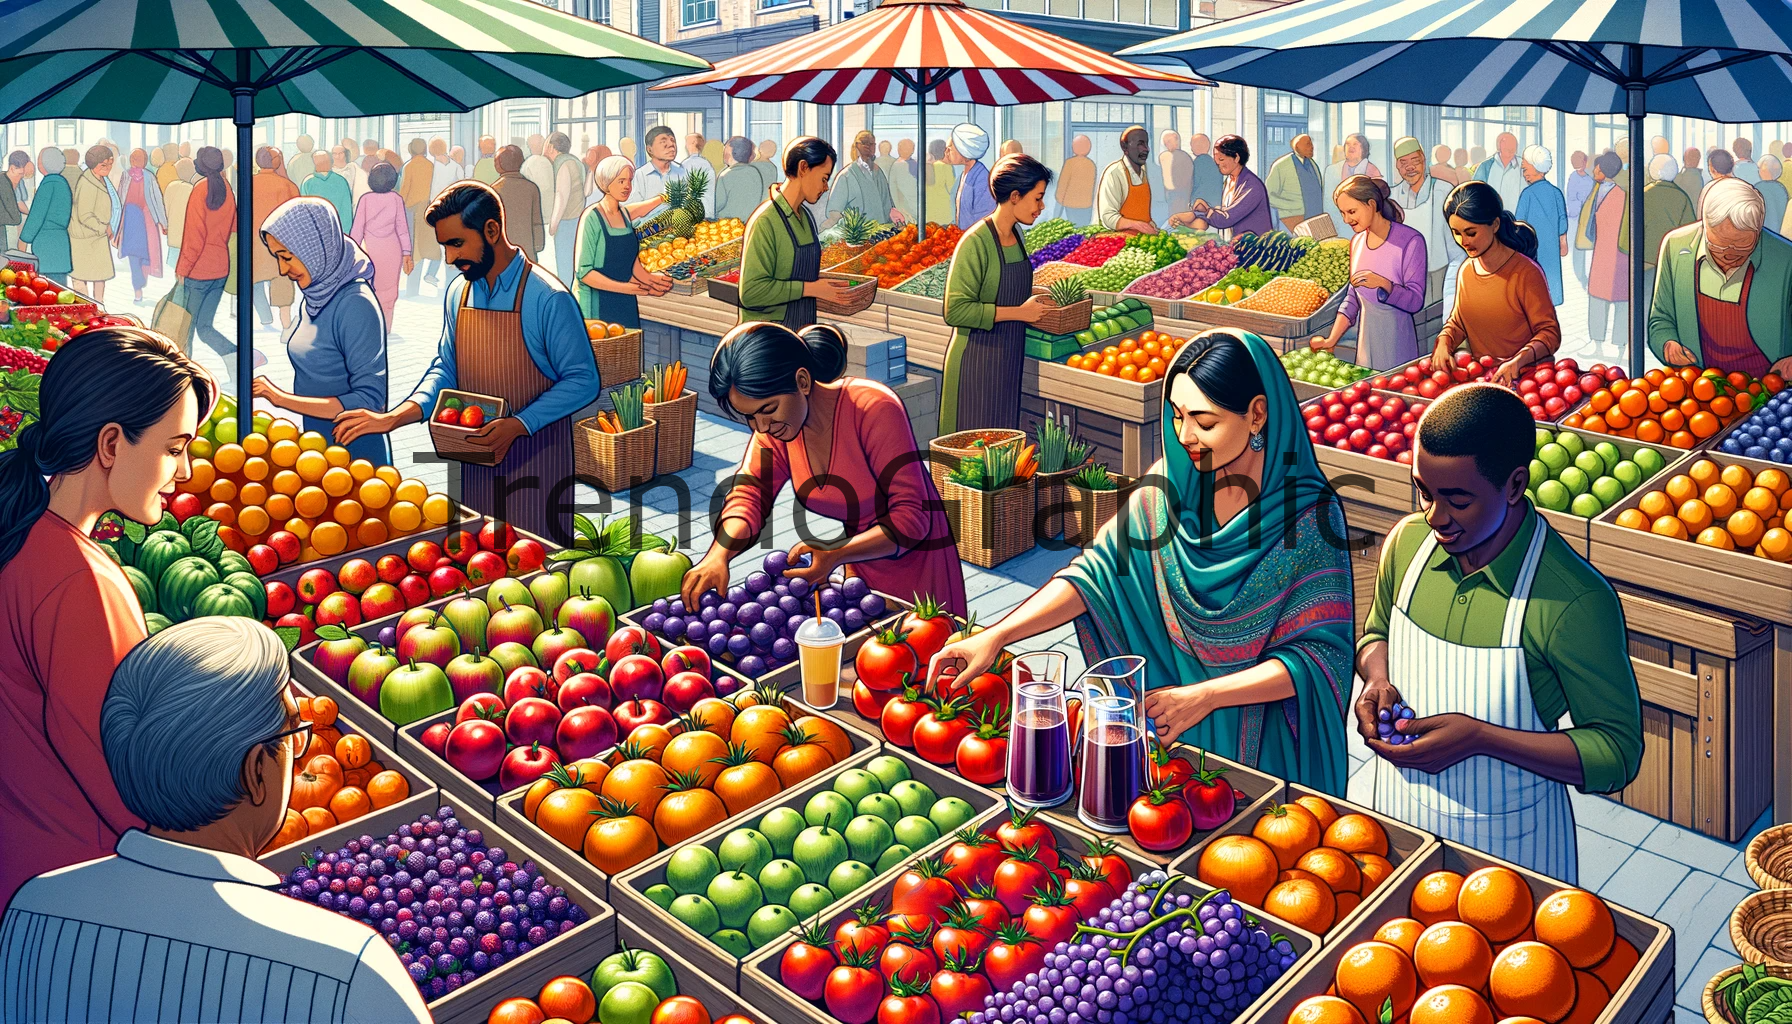 Bustling Farmers Market Scene: Fresh Produce and Variety of Drink